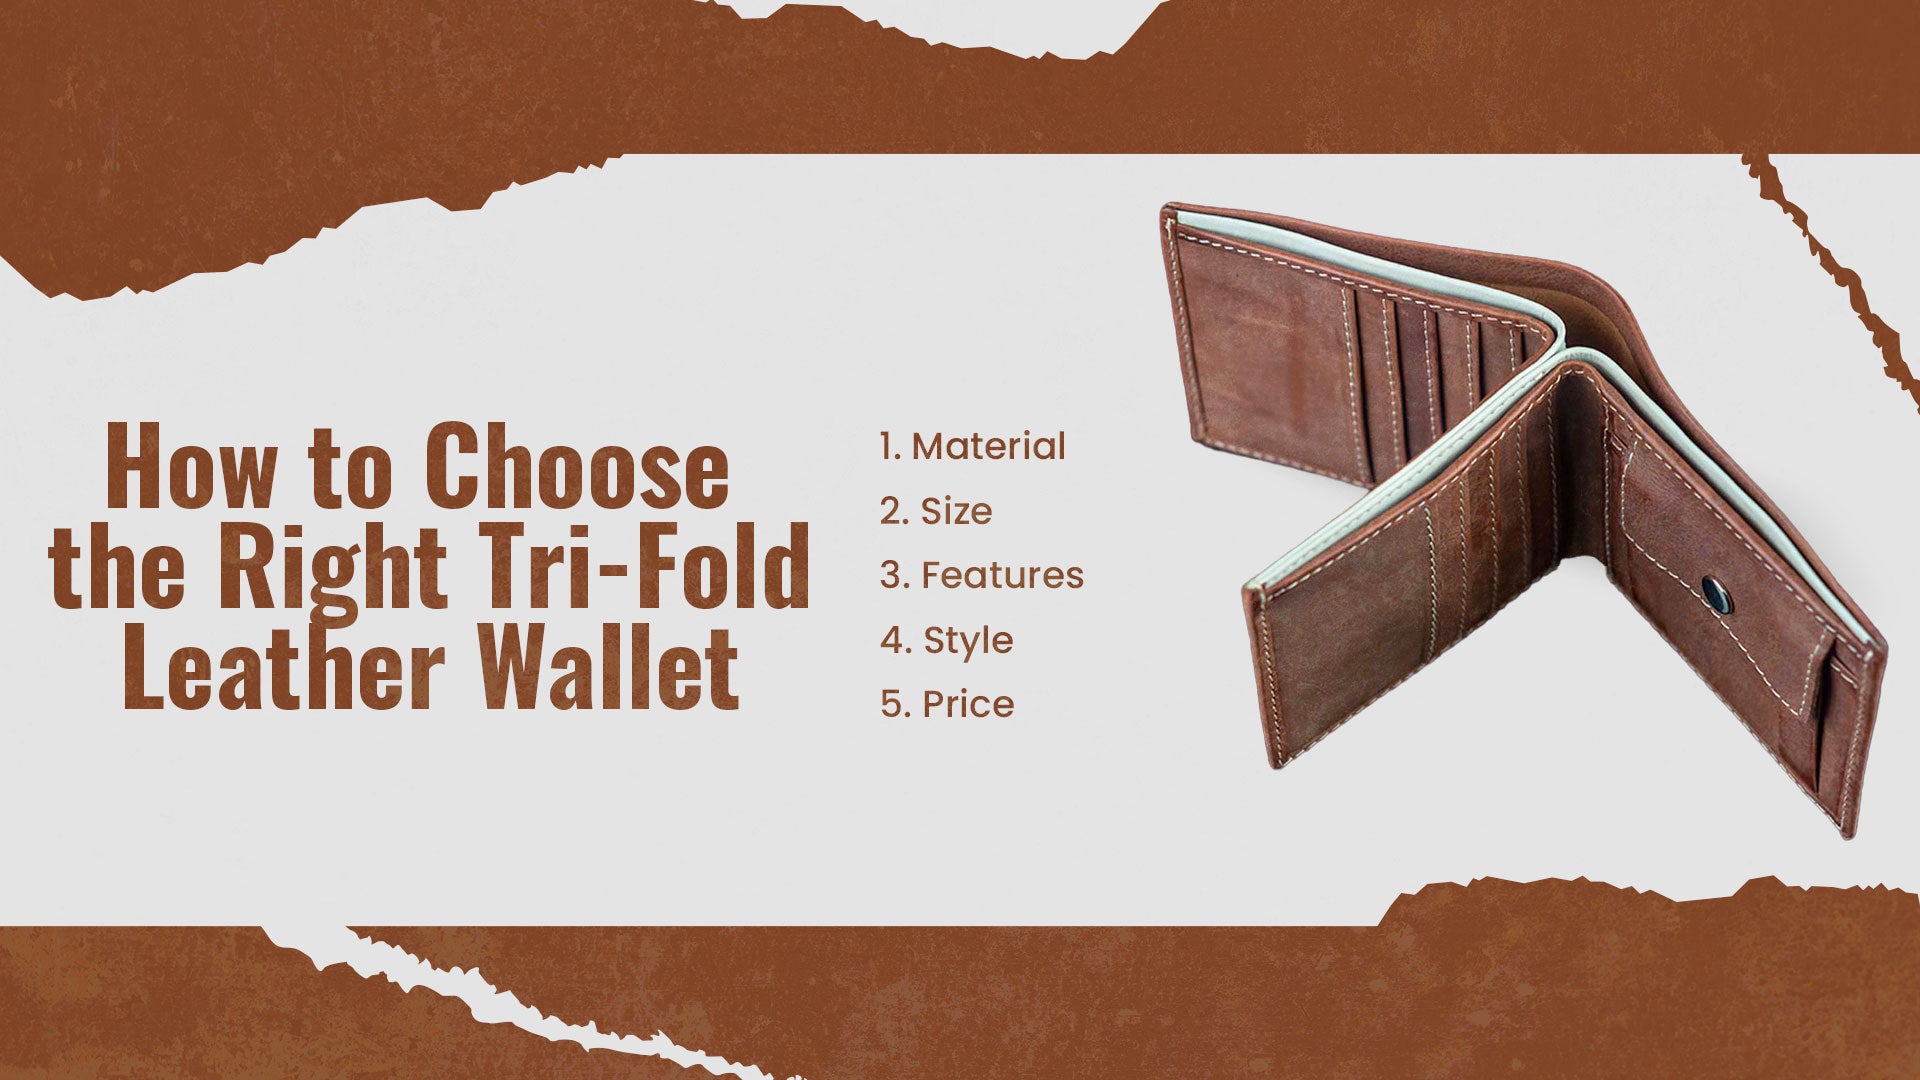 How to Choose the Right Tri-Fold Leather Wallet